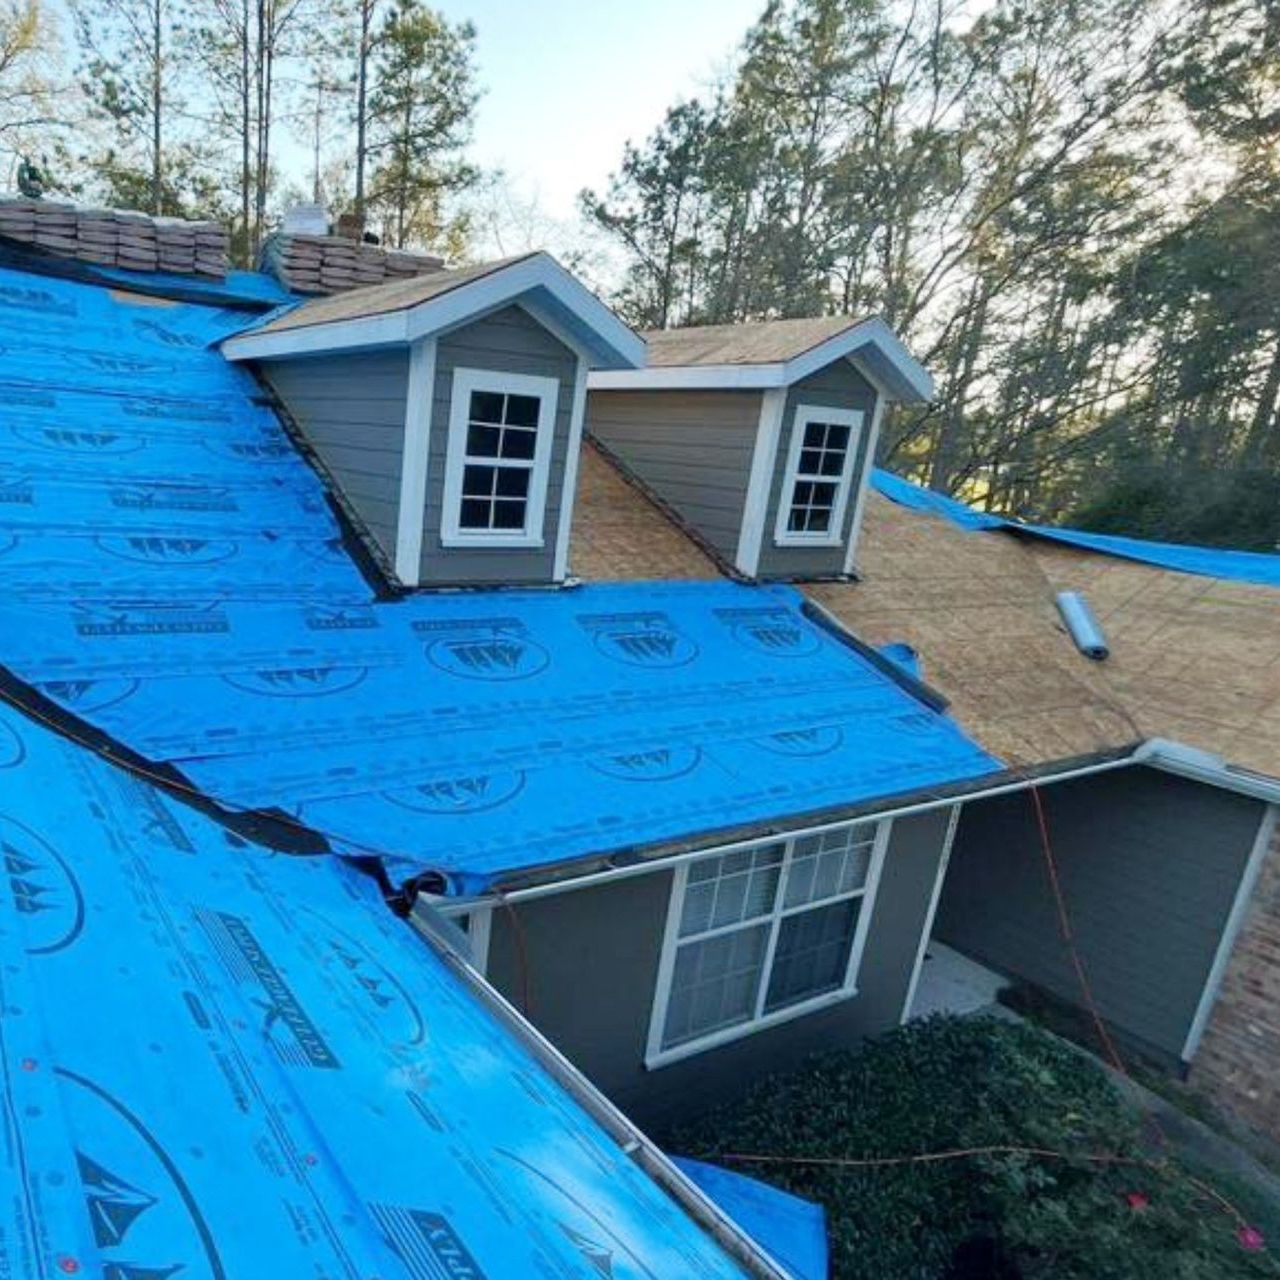 A house with a blue tarp on the roof is being remodeled.